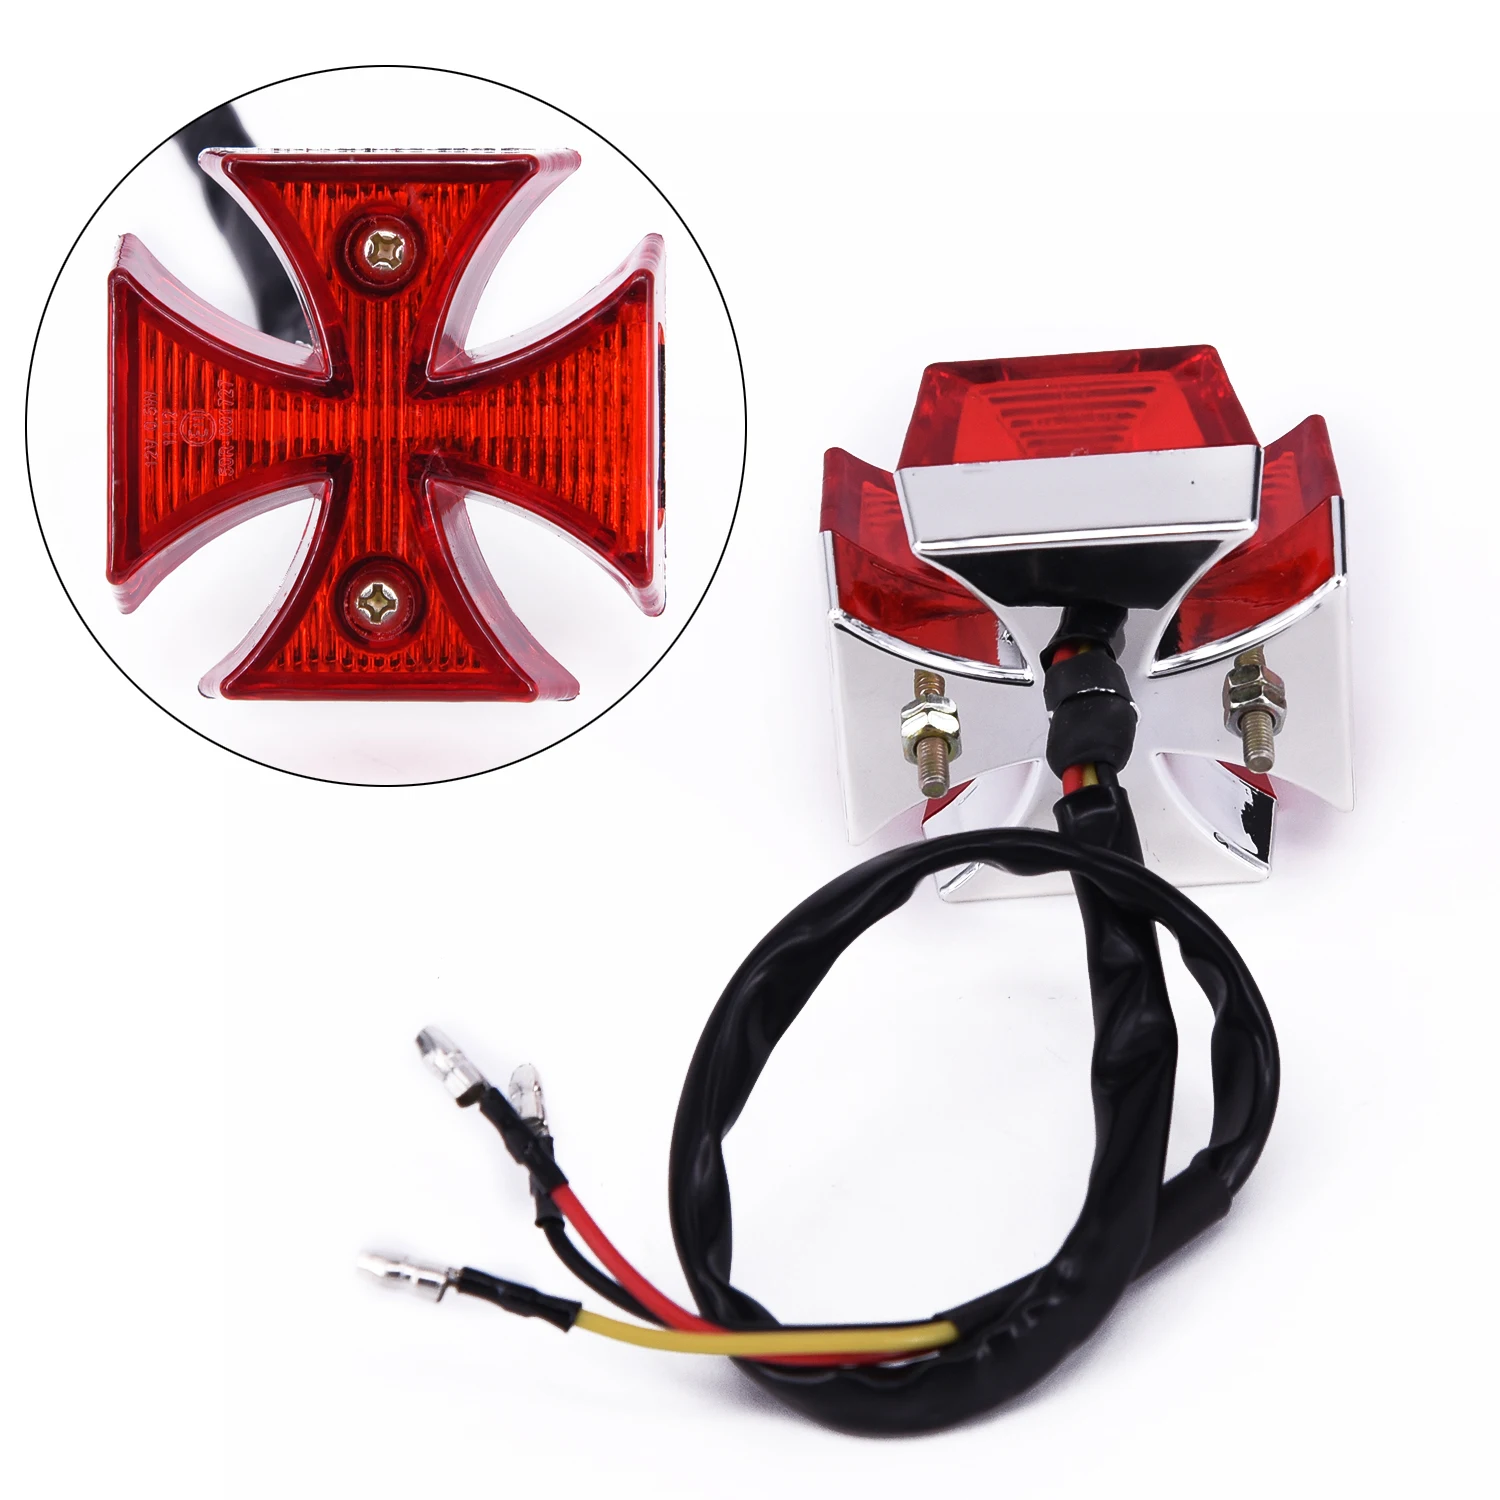 Motorcycle Tail Light - Distinctive Maltese Cross Design, Universal Fit for Ch - £10.19 GBP